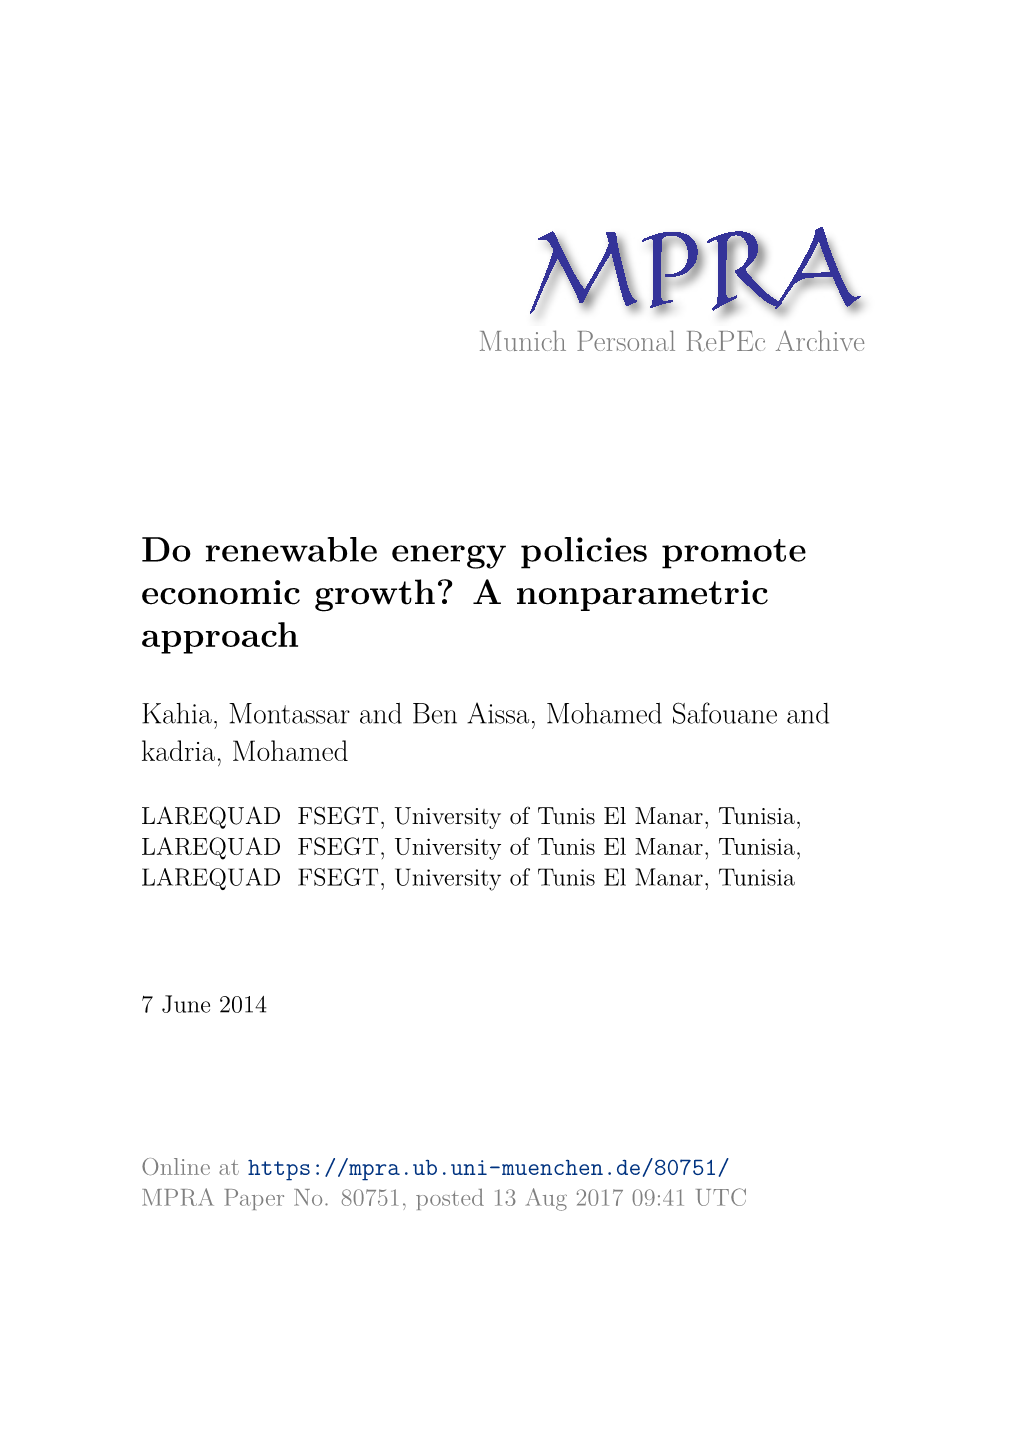 Do Renewable Energy Policies Promote Economic Growth? a Nonparametric Approach